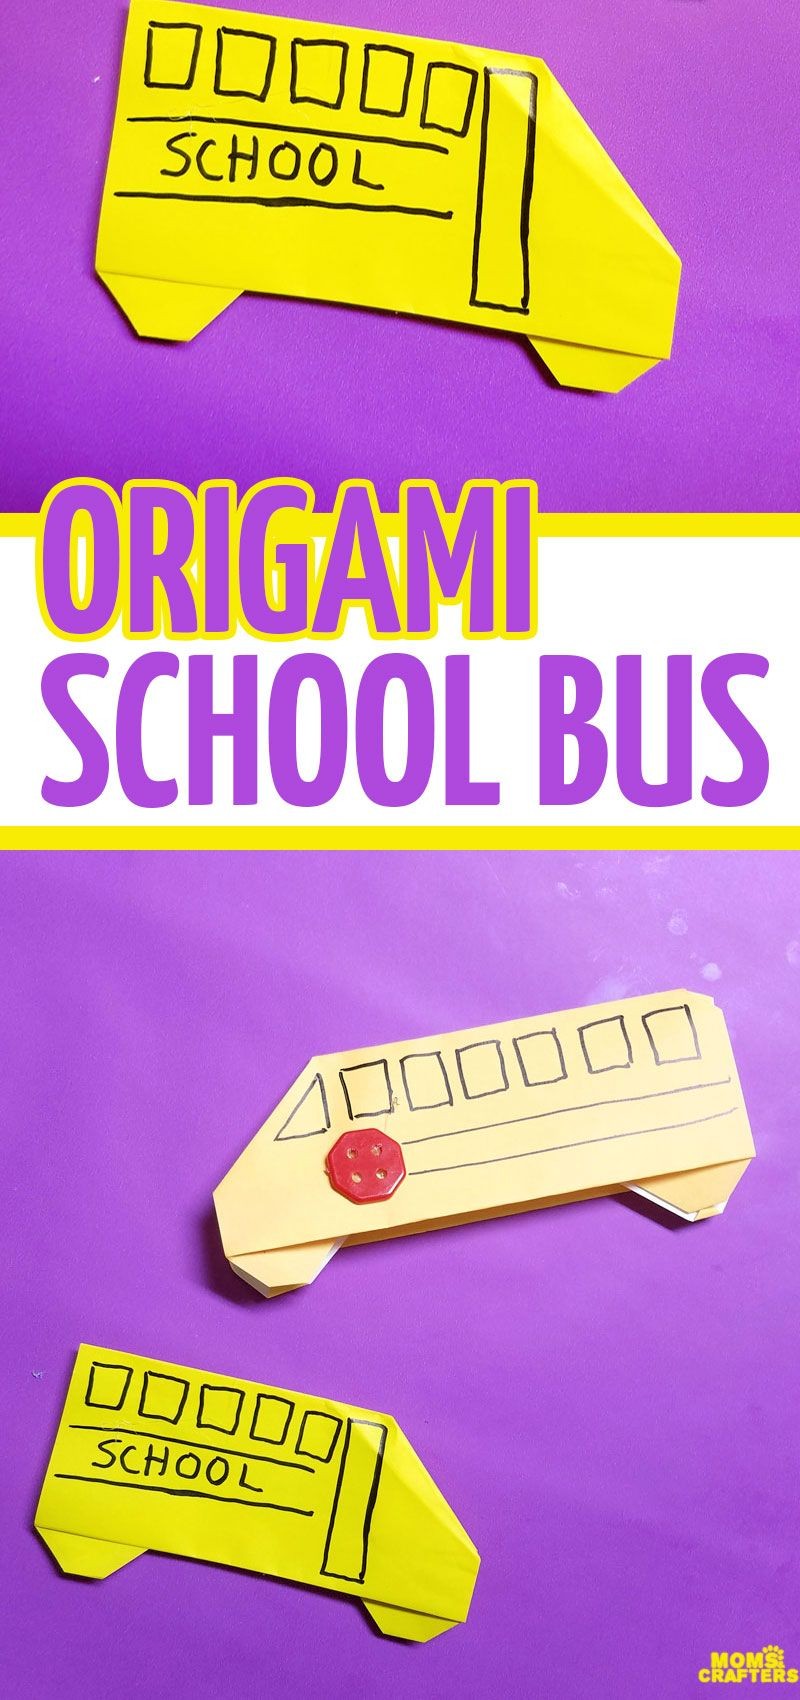 Kids Papercraft Make An Easy origami School Bus